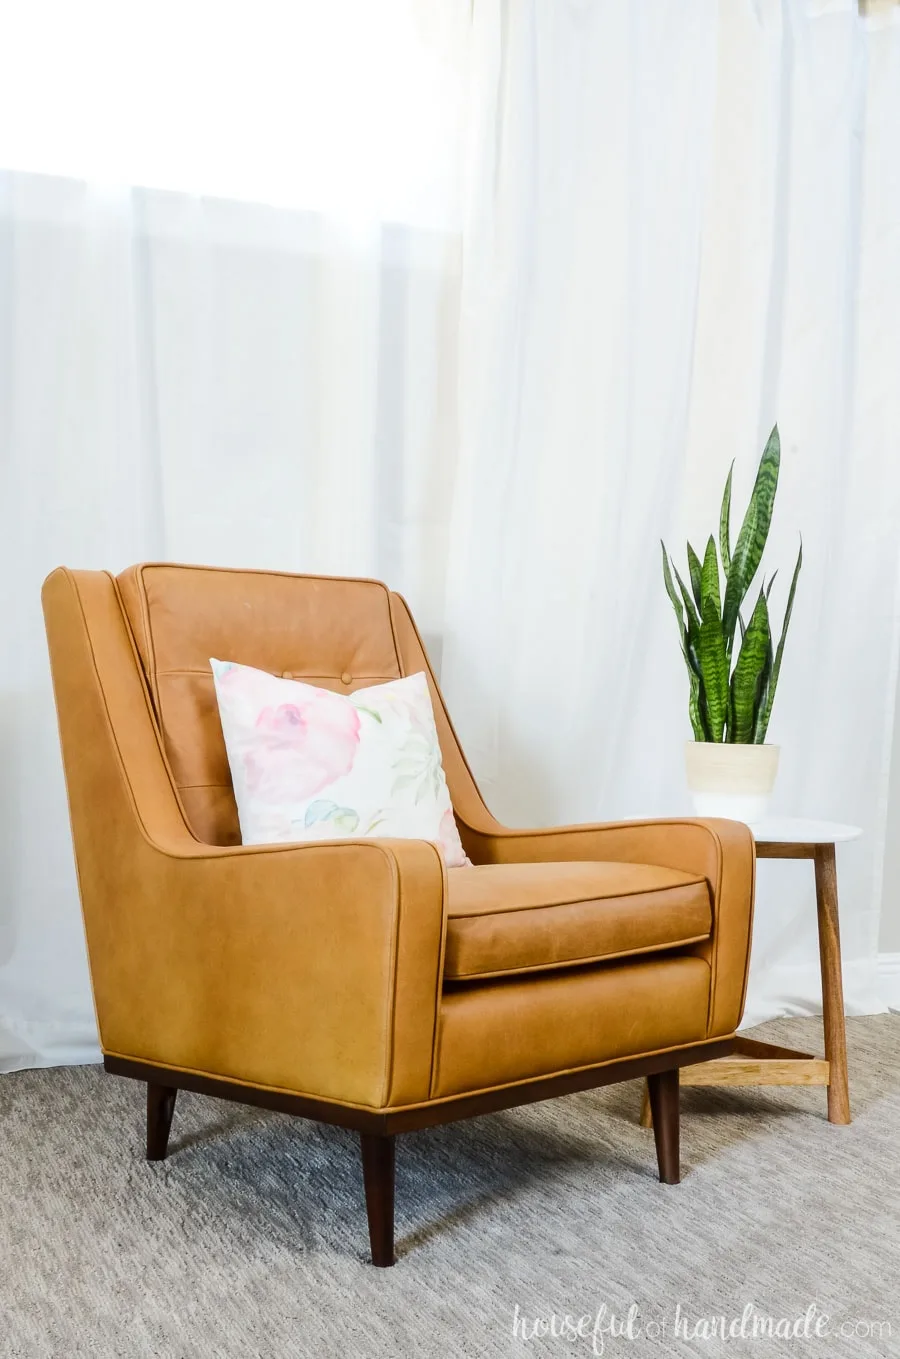 Leather is a great option for furniture that can hold up for years. We gave this tan leather armchair a feminine look and did a complete living room refresh for spring. See the details at Housefulofhandmade.com.